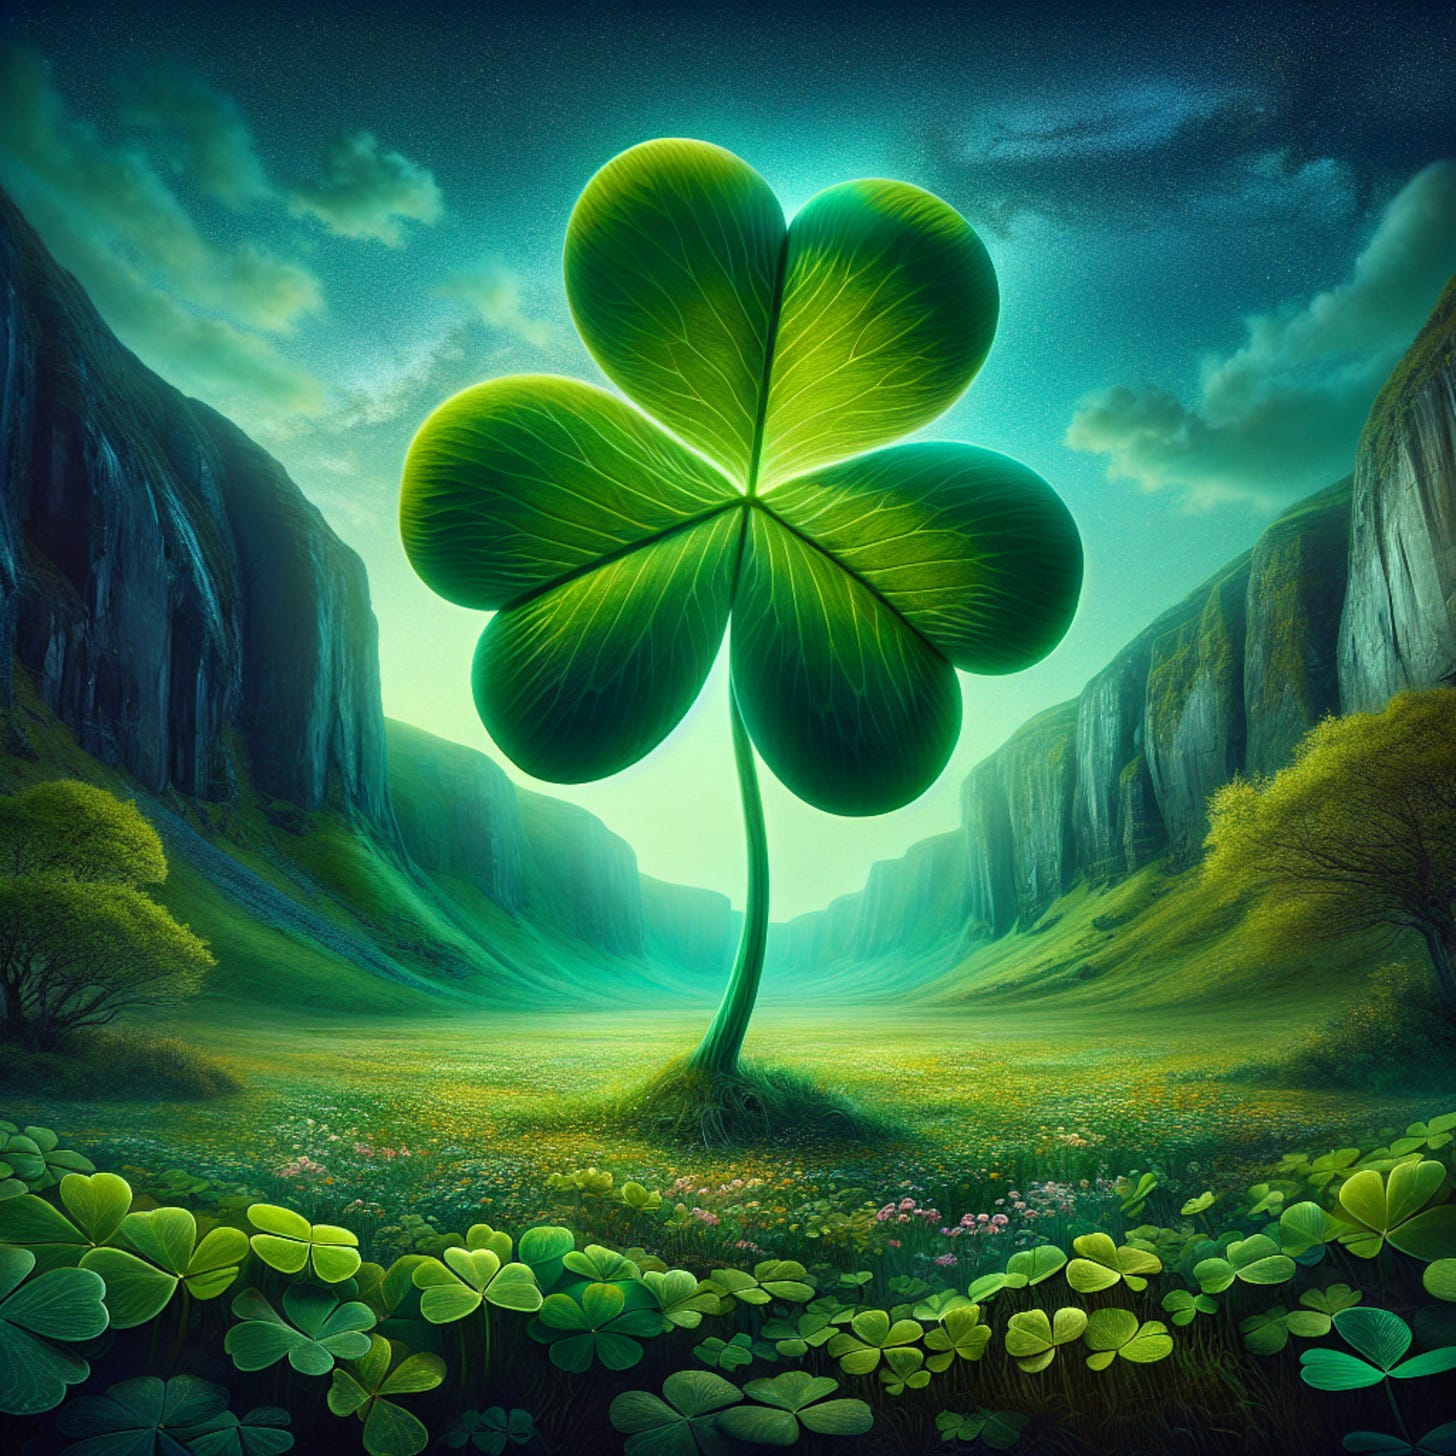 This image depicts a fantastical landscape dominated by a gigantic three-leafed shamrock that stands tall at the center. Each leaf of the shamrock is oversized and radiates with a lush green color that has a luminescent quality, with prominent veining details that suggest vitality and growth. The shamrock has a smooth, curved stem that anchors it to the ground where smaller, regular-sized shamrocks and various flowers blanket the soil, creating a dense undergrowth.  The setting is a verdant valley flanked by steep cliffs on both sides. The cliffs appear almost vertical, with striations indicating geological layers, and they have a grayish-blue tint, suggesting the presence of stone or slate. Atop the cliffs, greenery can be seen clinging to the edges, while a few trees with bright green foliage grow in the distance, indicating life thriving even in these high places.  The sky above is a twilight canvas, with stars beginning to emerge. Hues of blue and subtle greens blend into the dusk, casting a serene and otherworldly glow over the entire scene. The atmosphere suggests it is either dawn or dusk due to the soft lighting and the presence of stars. The overall impression is one of enchantment and lush tranquility, with the oversized shamrock creating a sense of magic and wonder within a natural, yet surreal, world.